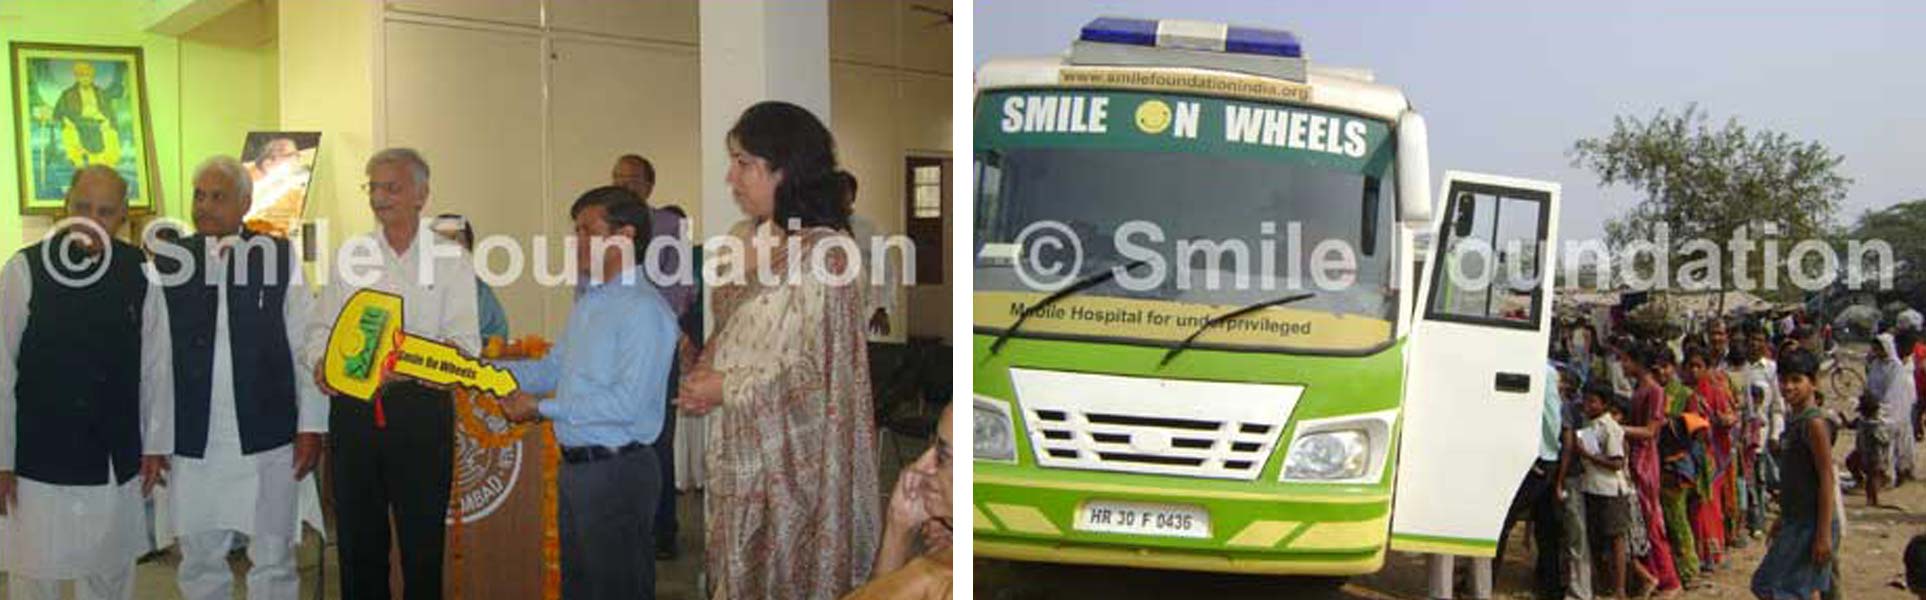 Smile launches 12th mobile hospital